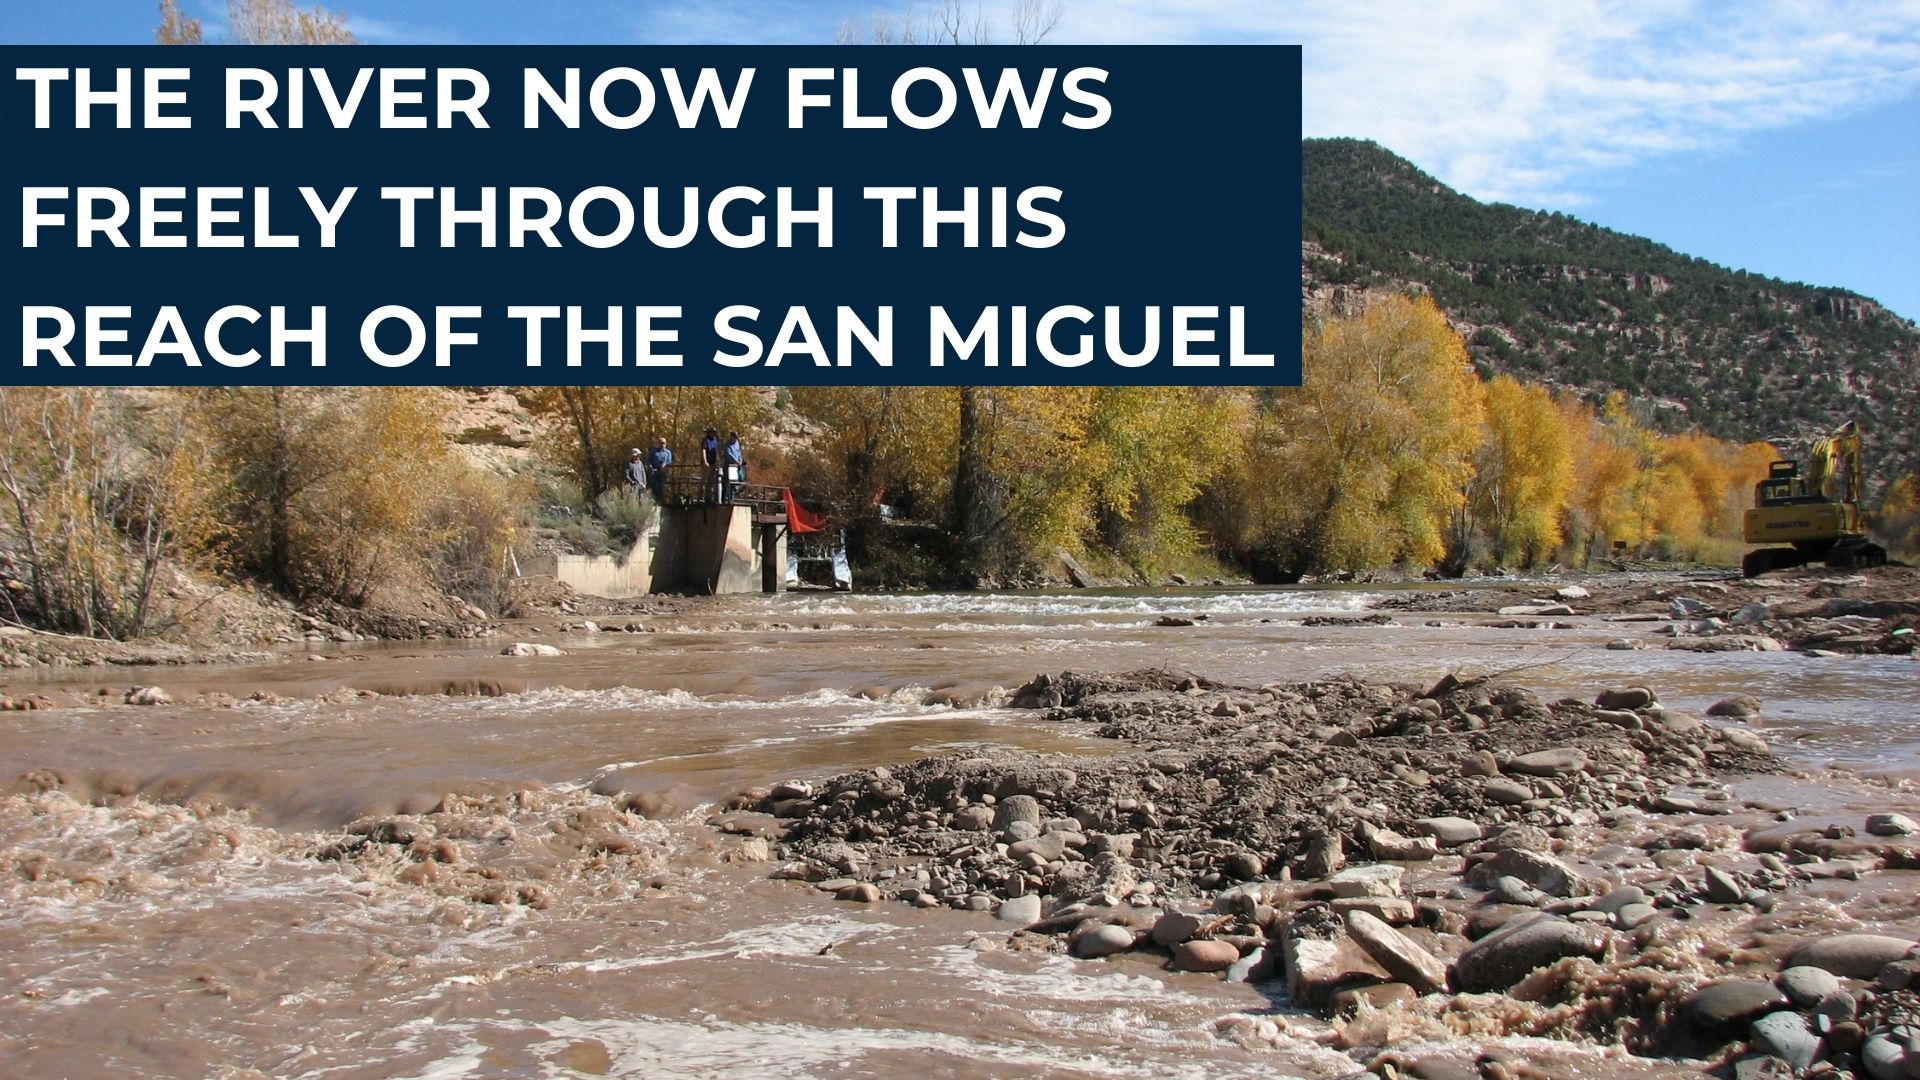 The river now flows freely through this reach of the San Miguel